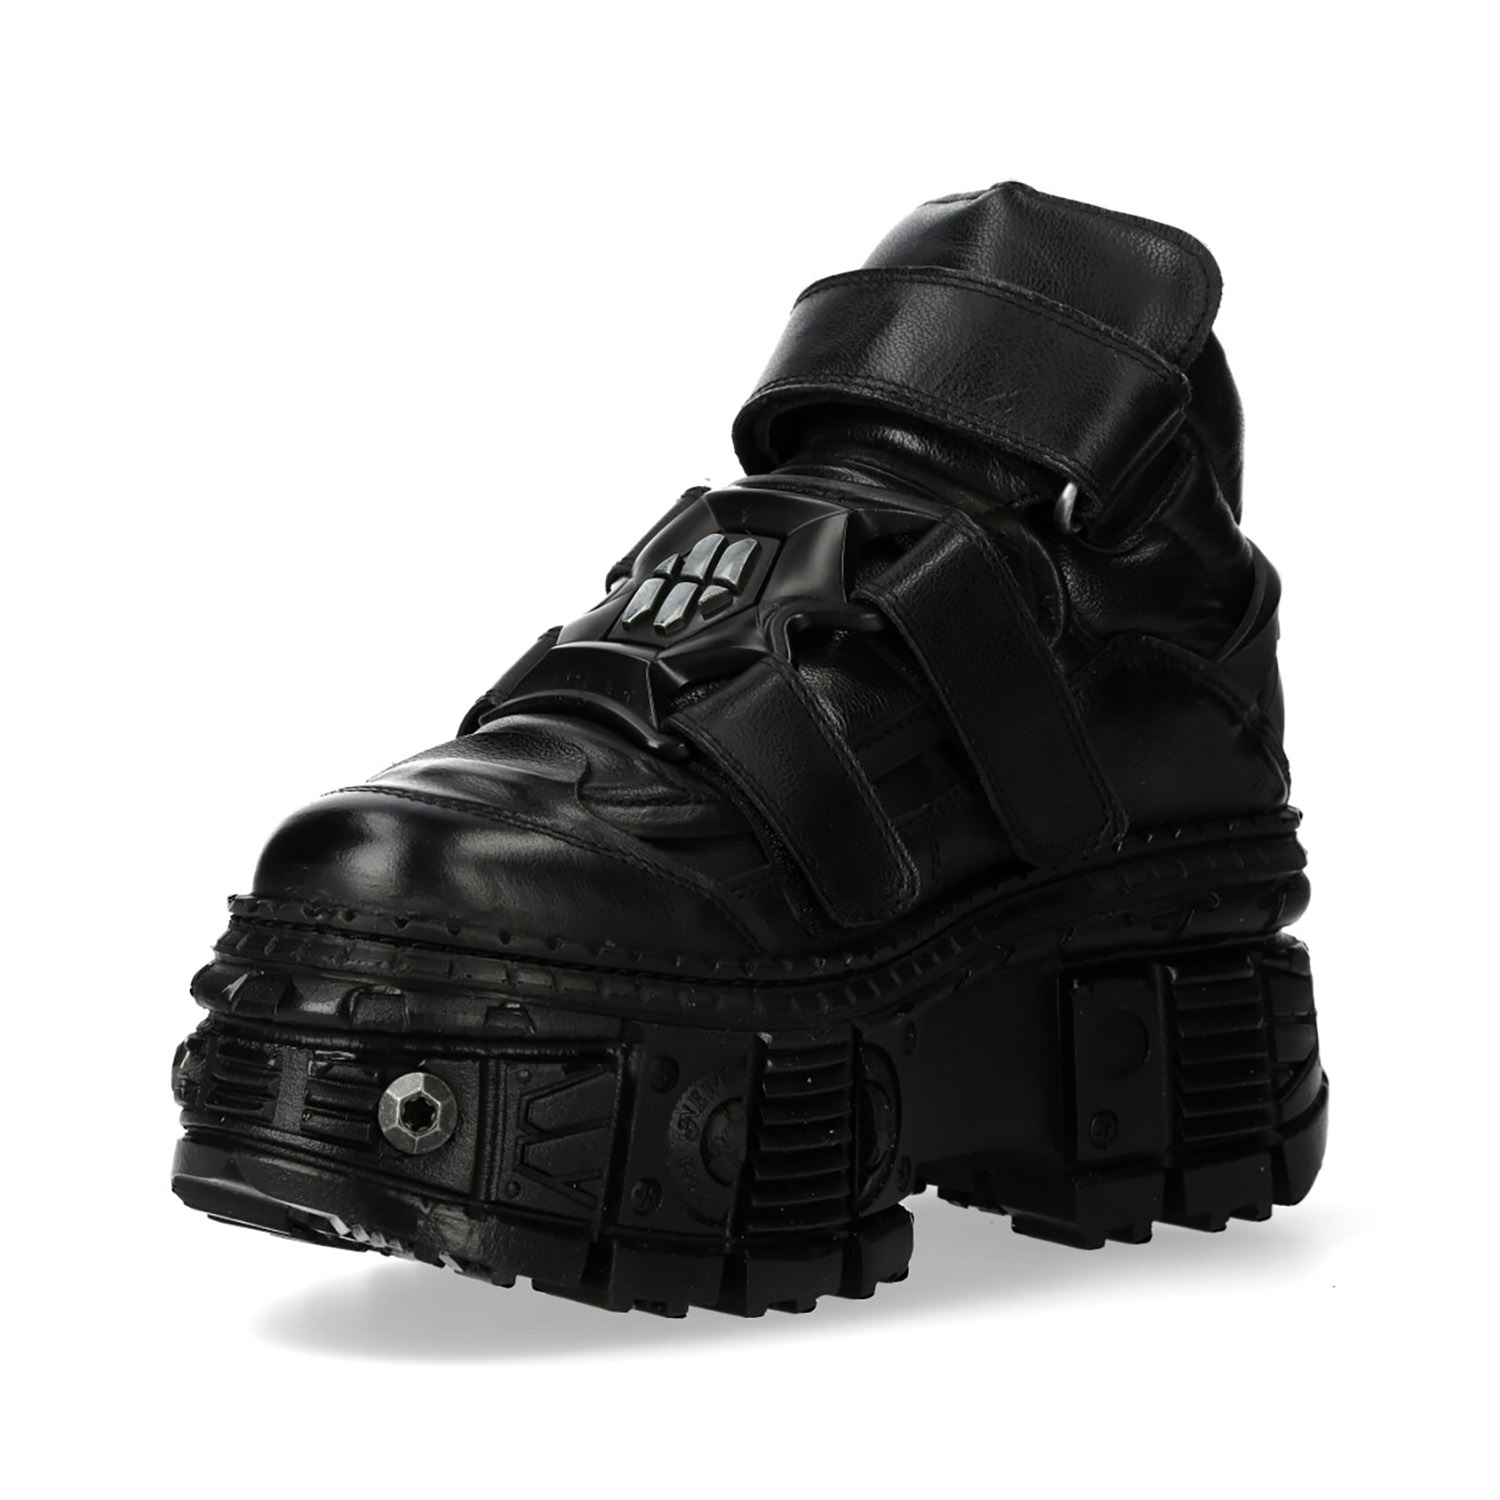 Black New Rock Tank Shoes M.WALL285-S10 • the dark store™